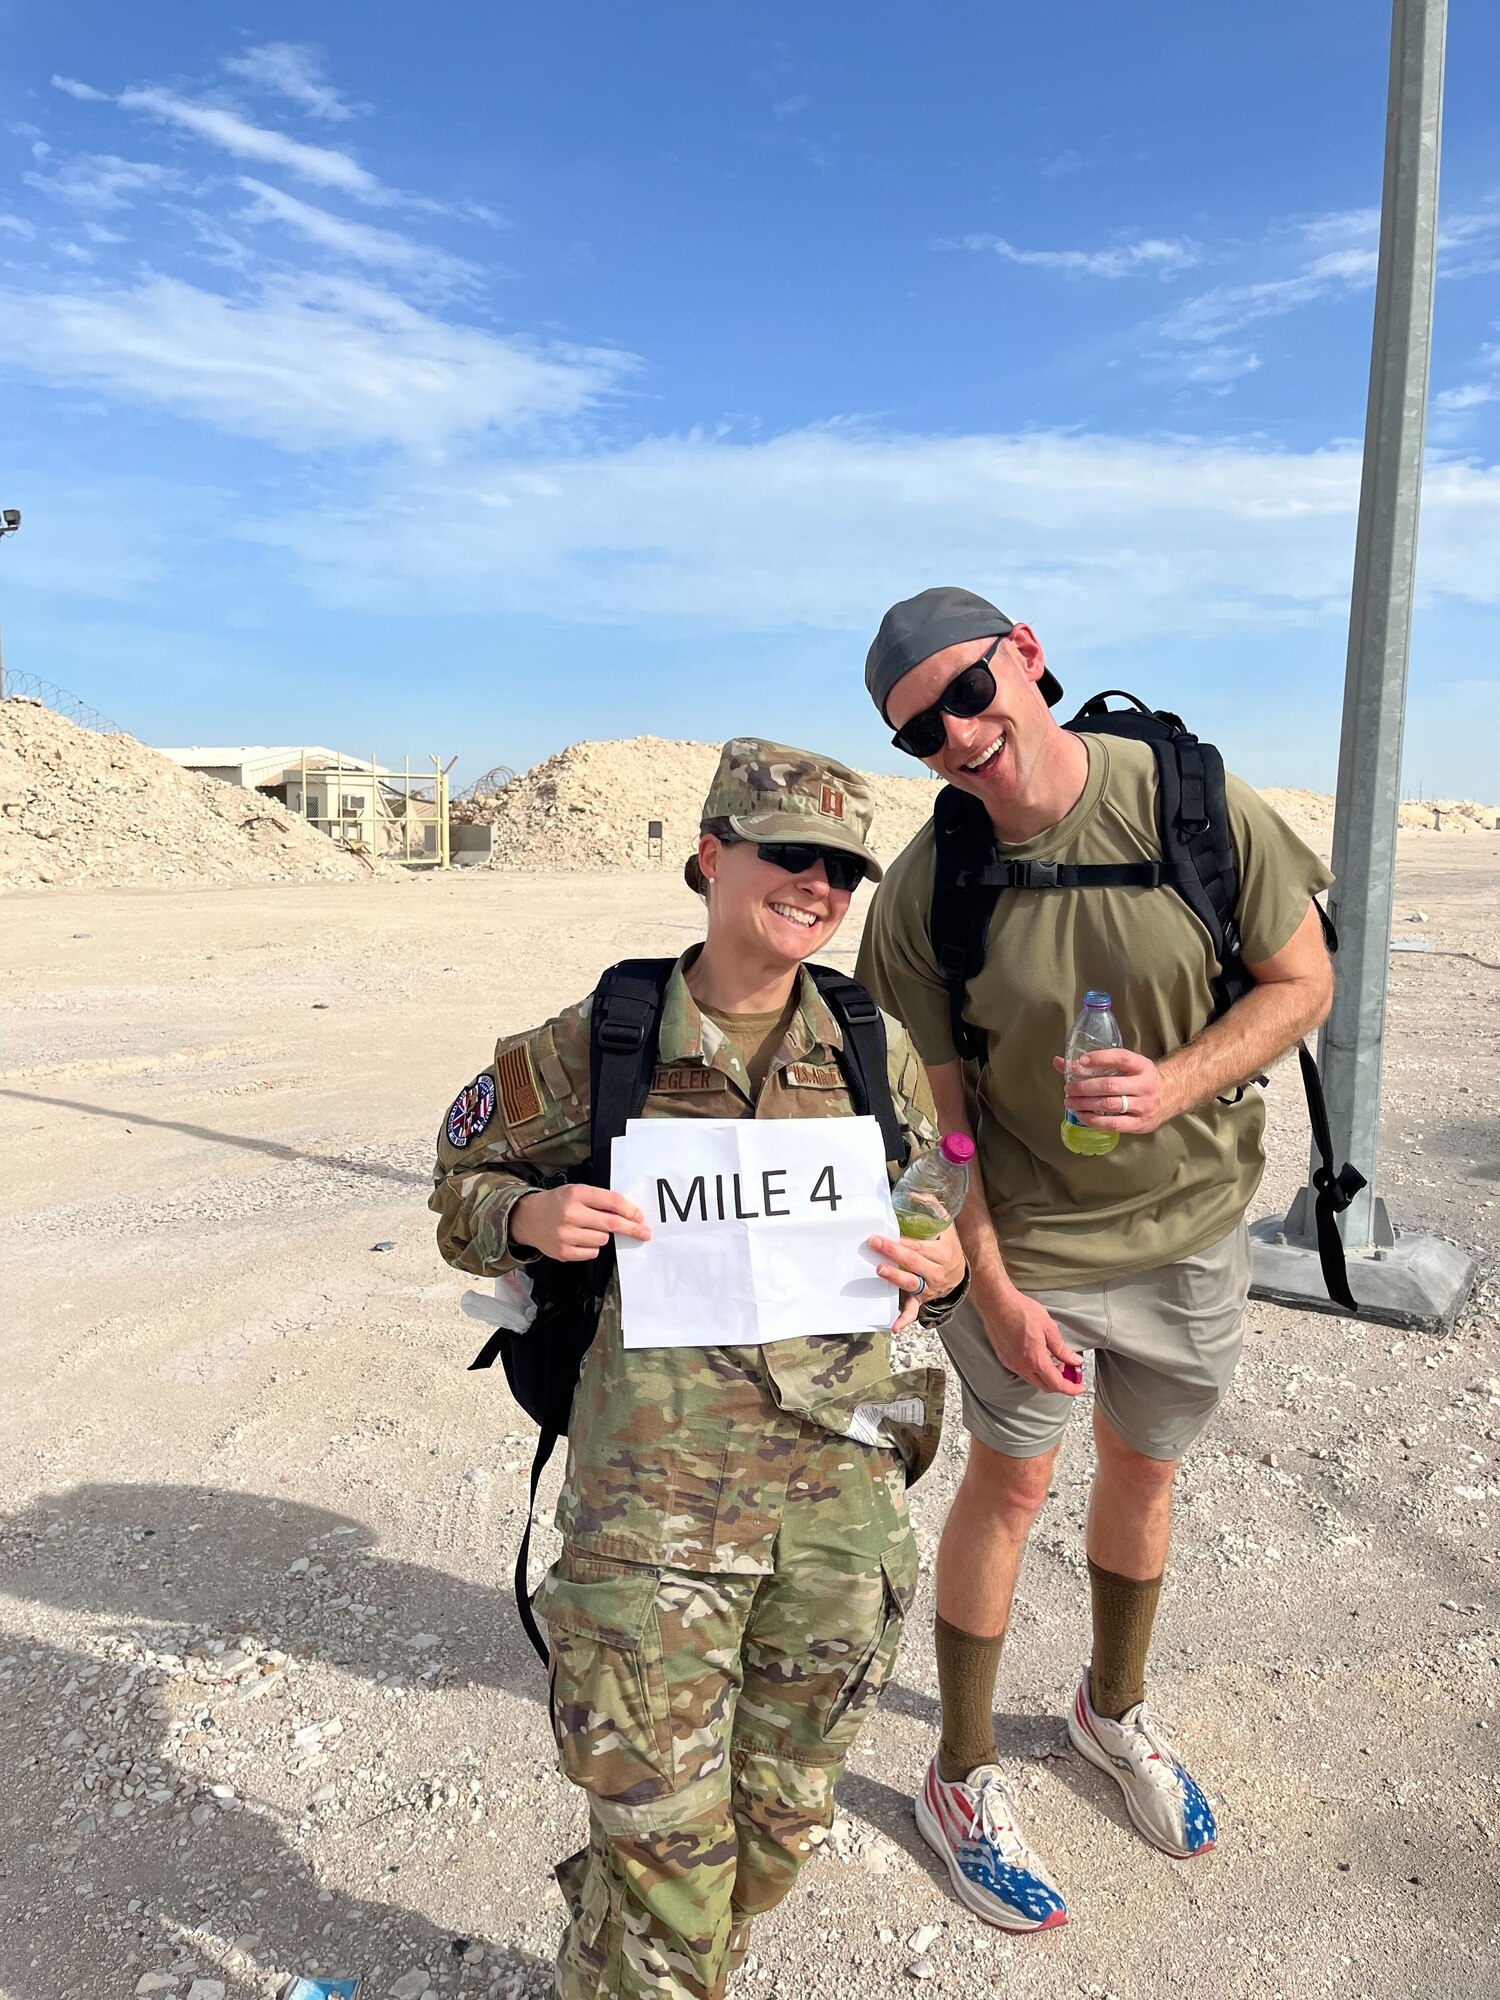 Capt. Holly Ziegler and supporter participates in Bataan Memorial Death March virtually while deployed to the 609th Air Operations Center, Al Udeid Airbase, Qatar.